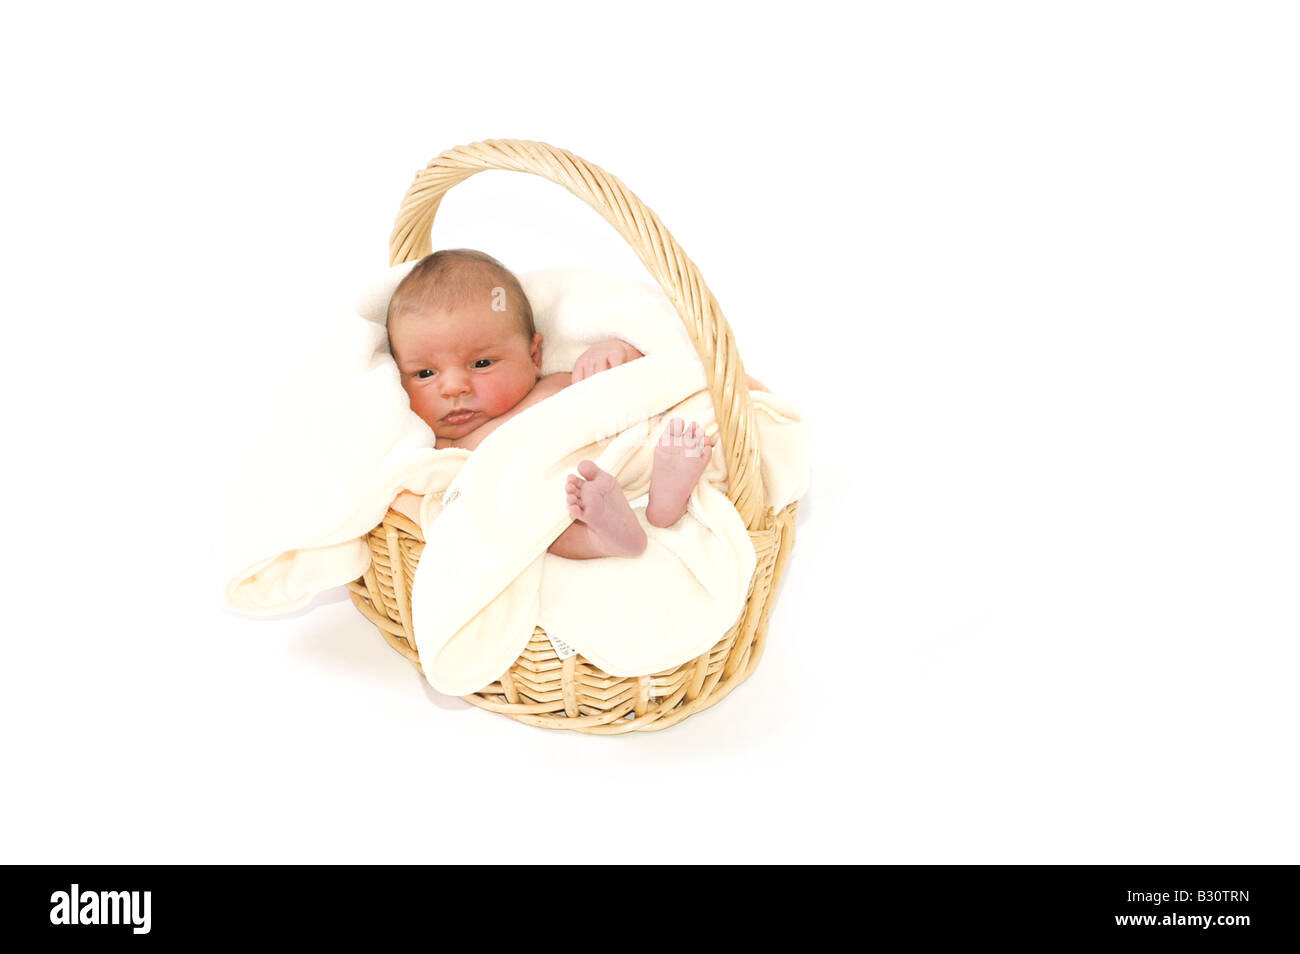 Baby in basket Stock Photo